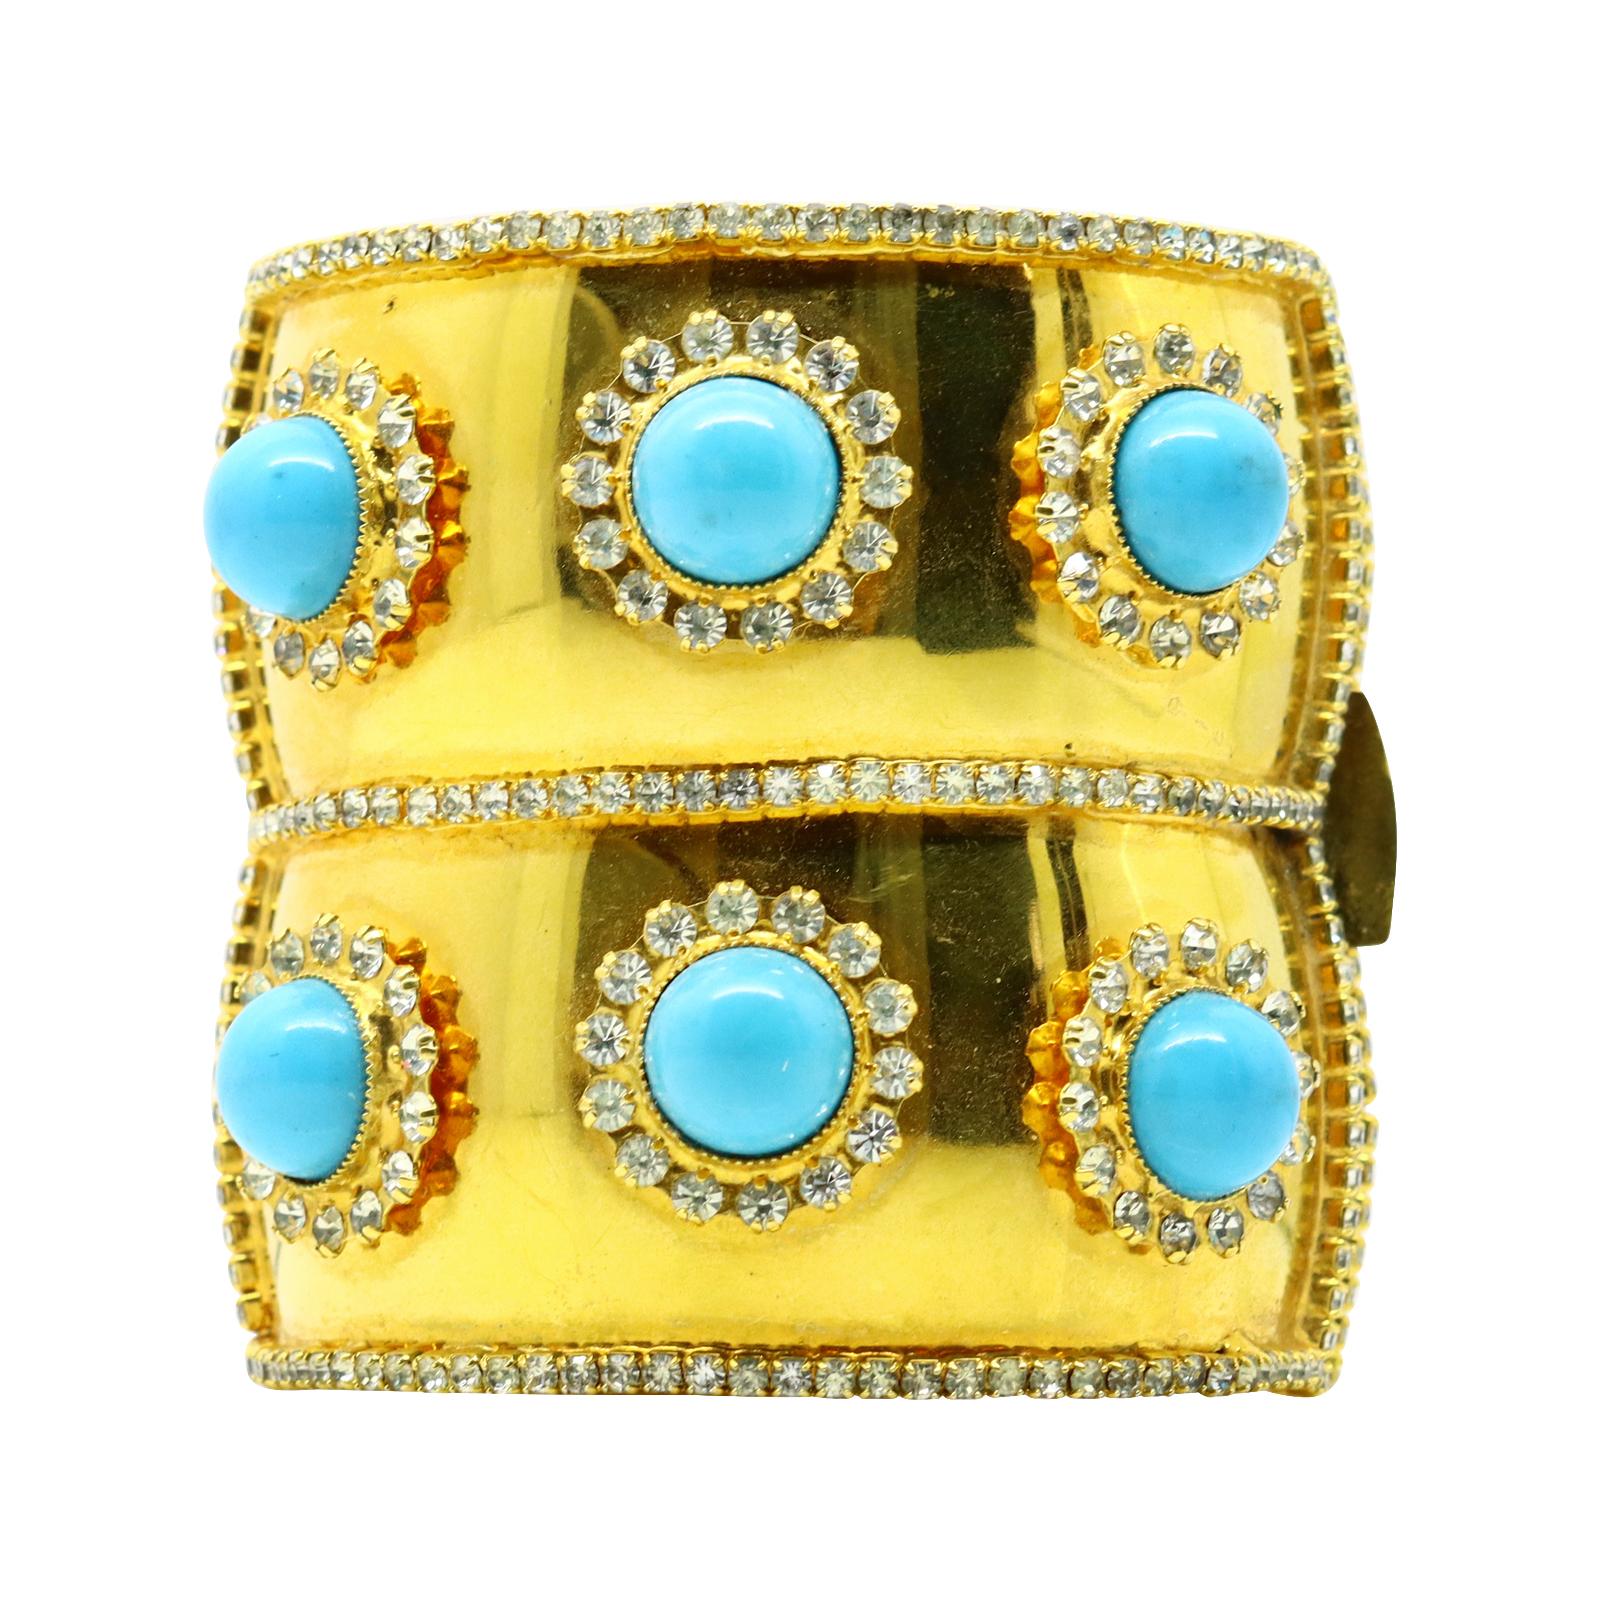 Vintage deLillo Gold Tone Crystal with Faux Turquoise Bracelet Circa !970s For Sale 8